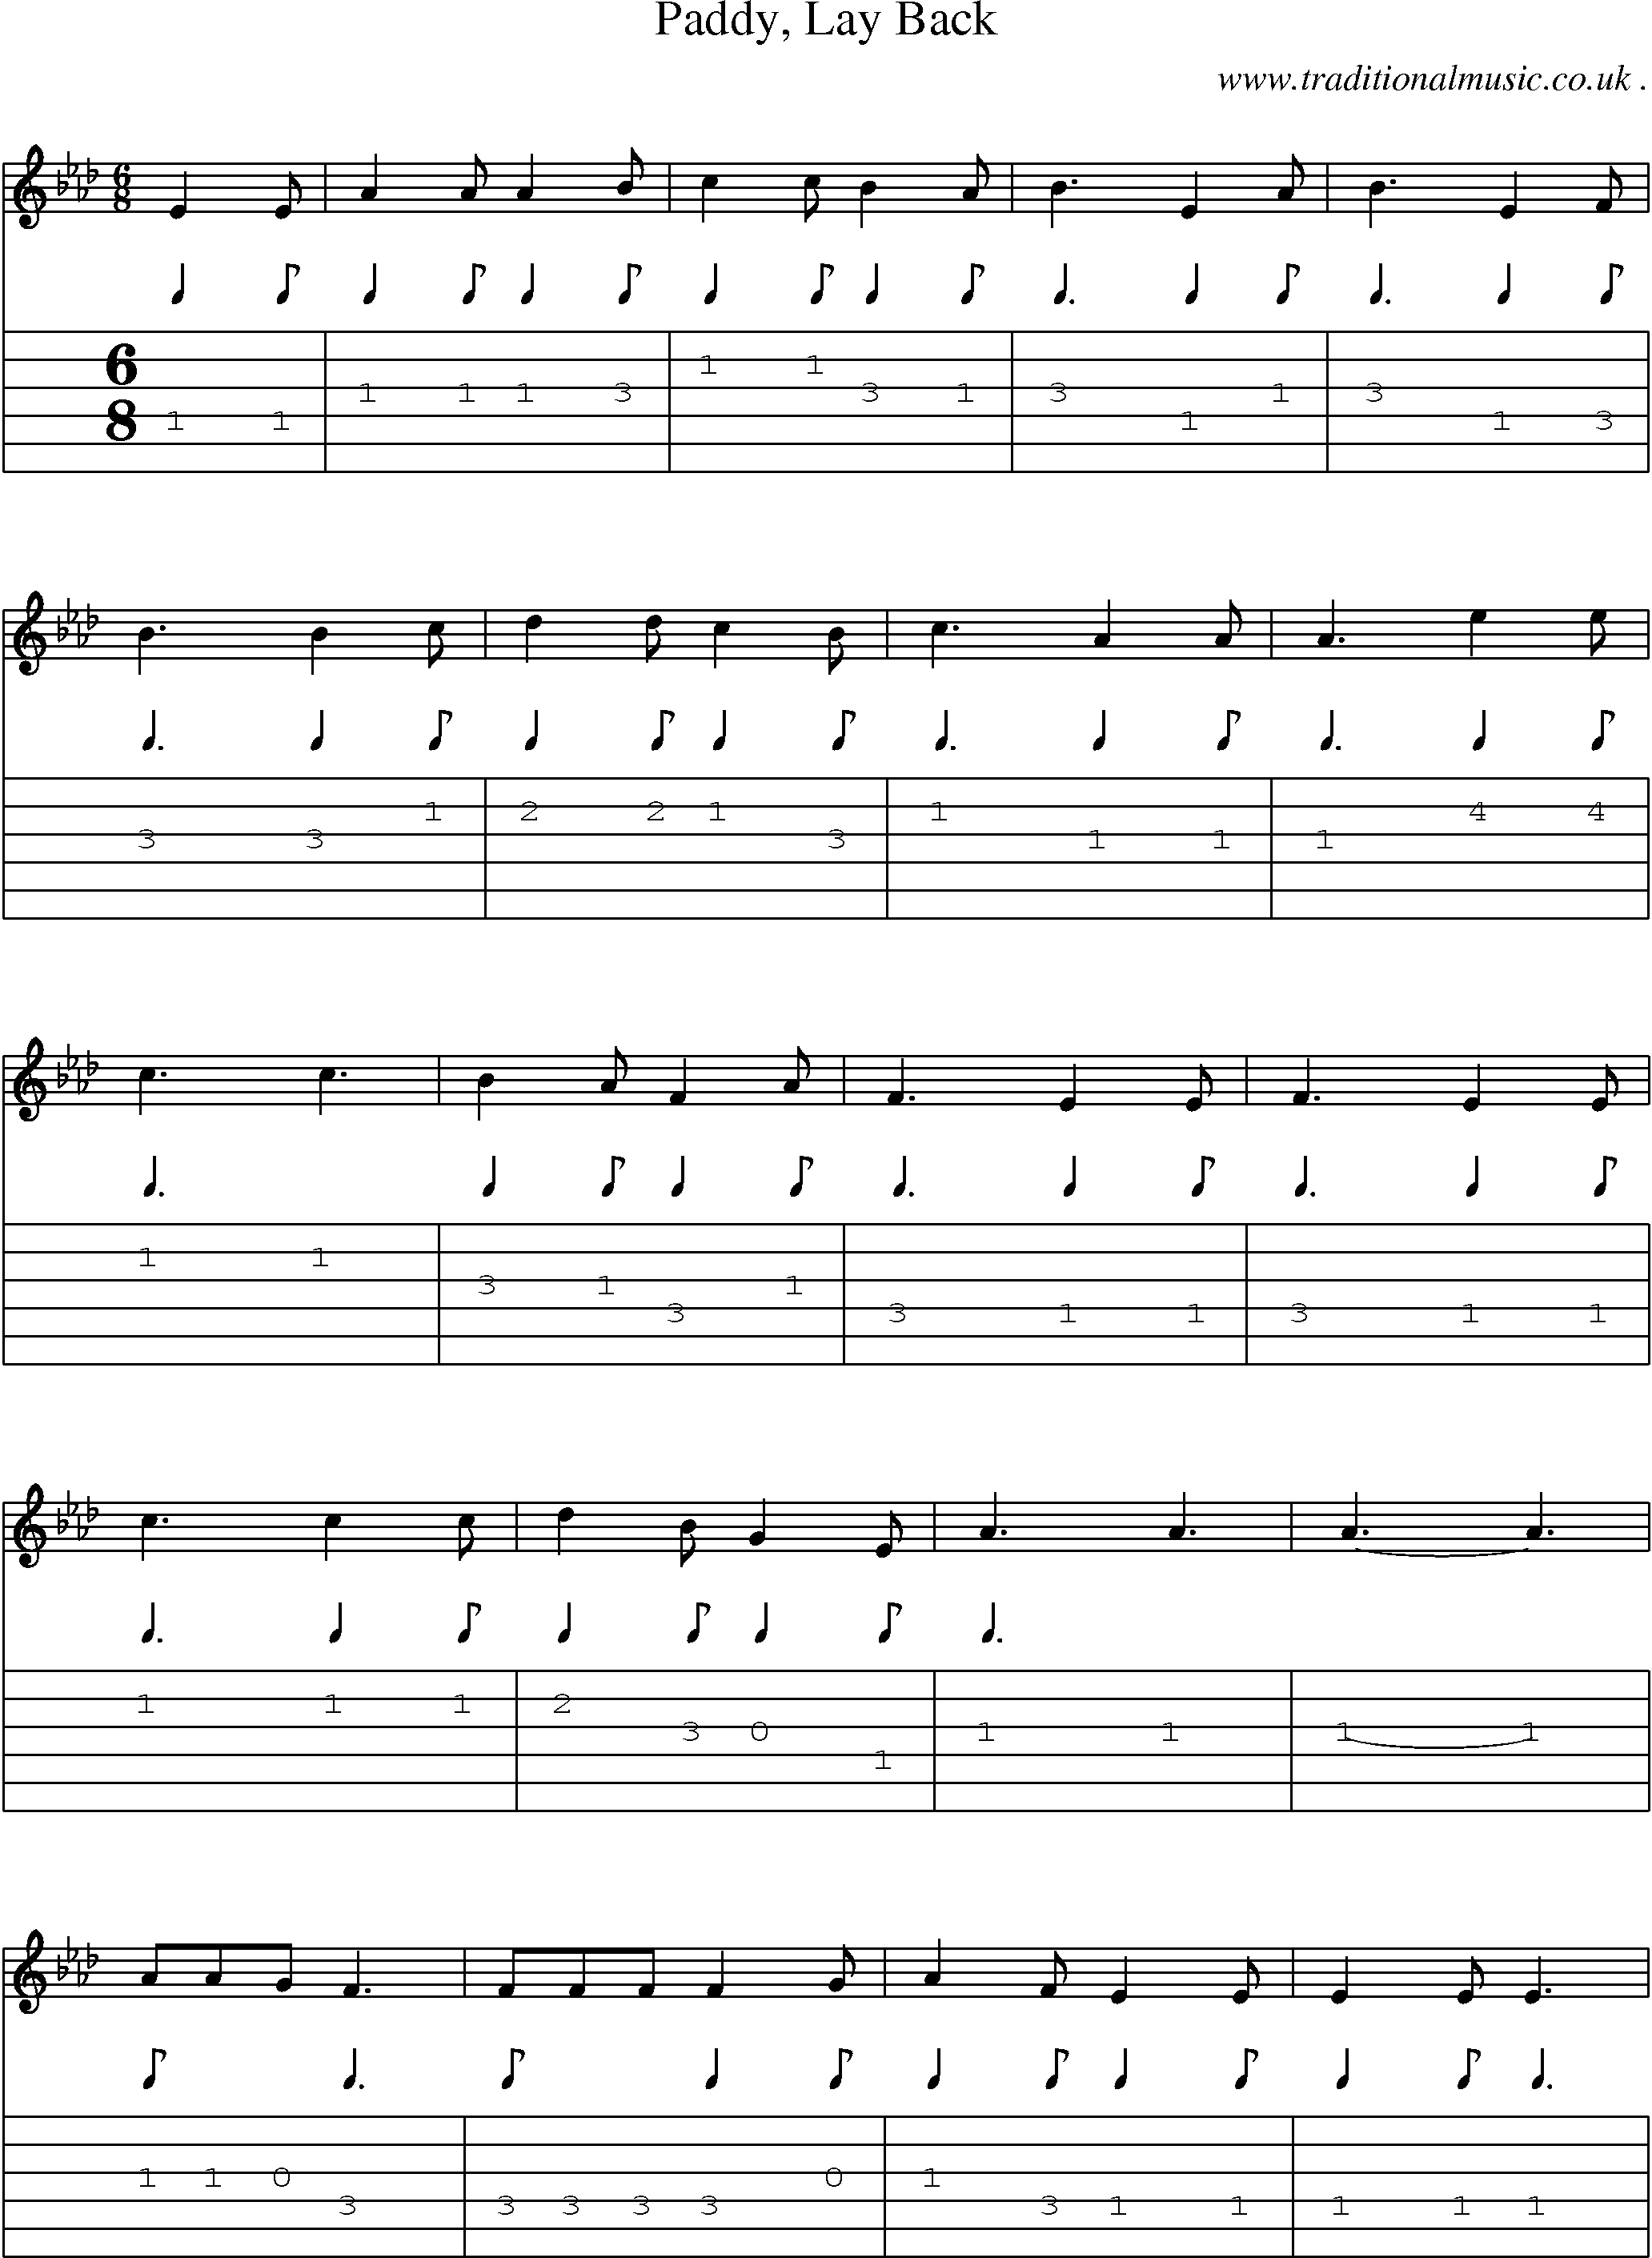 Sheet-Music and Guitar Tabs for Paddy Lay Back